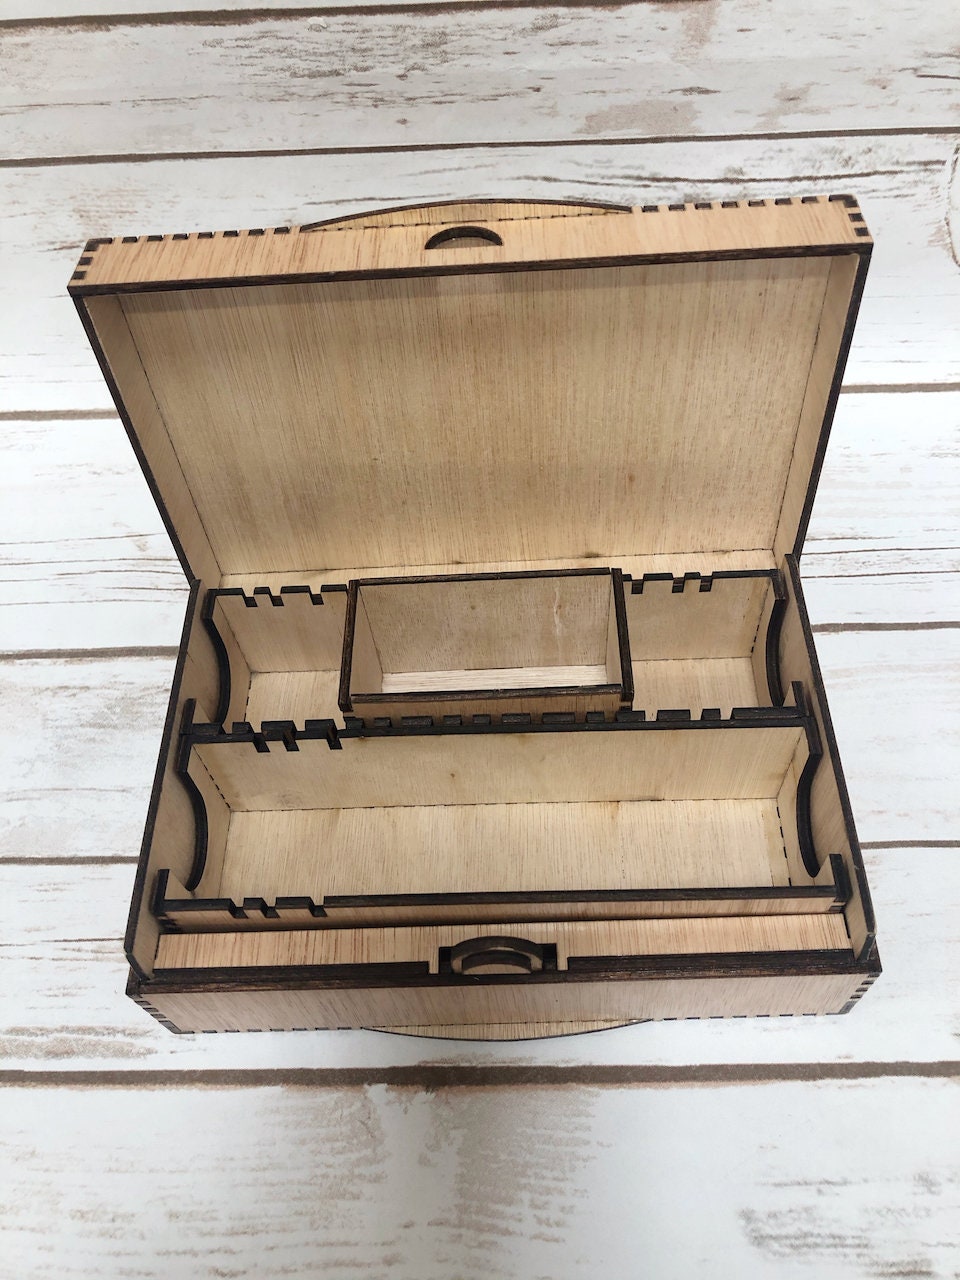 Carcassonne Travel Box with tile trays and meeple storage box 